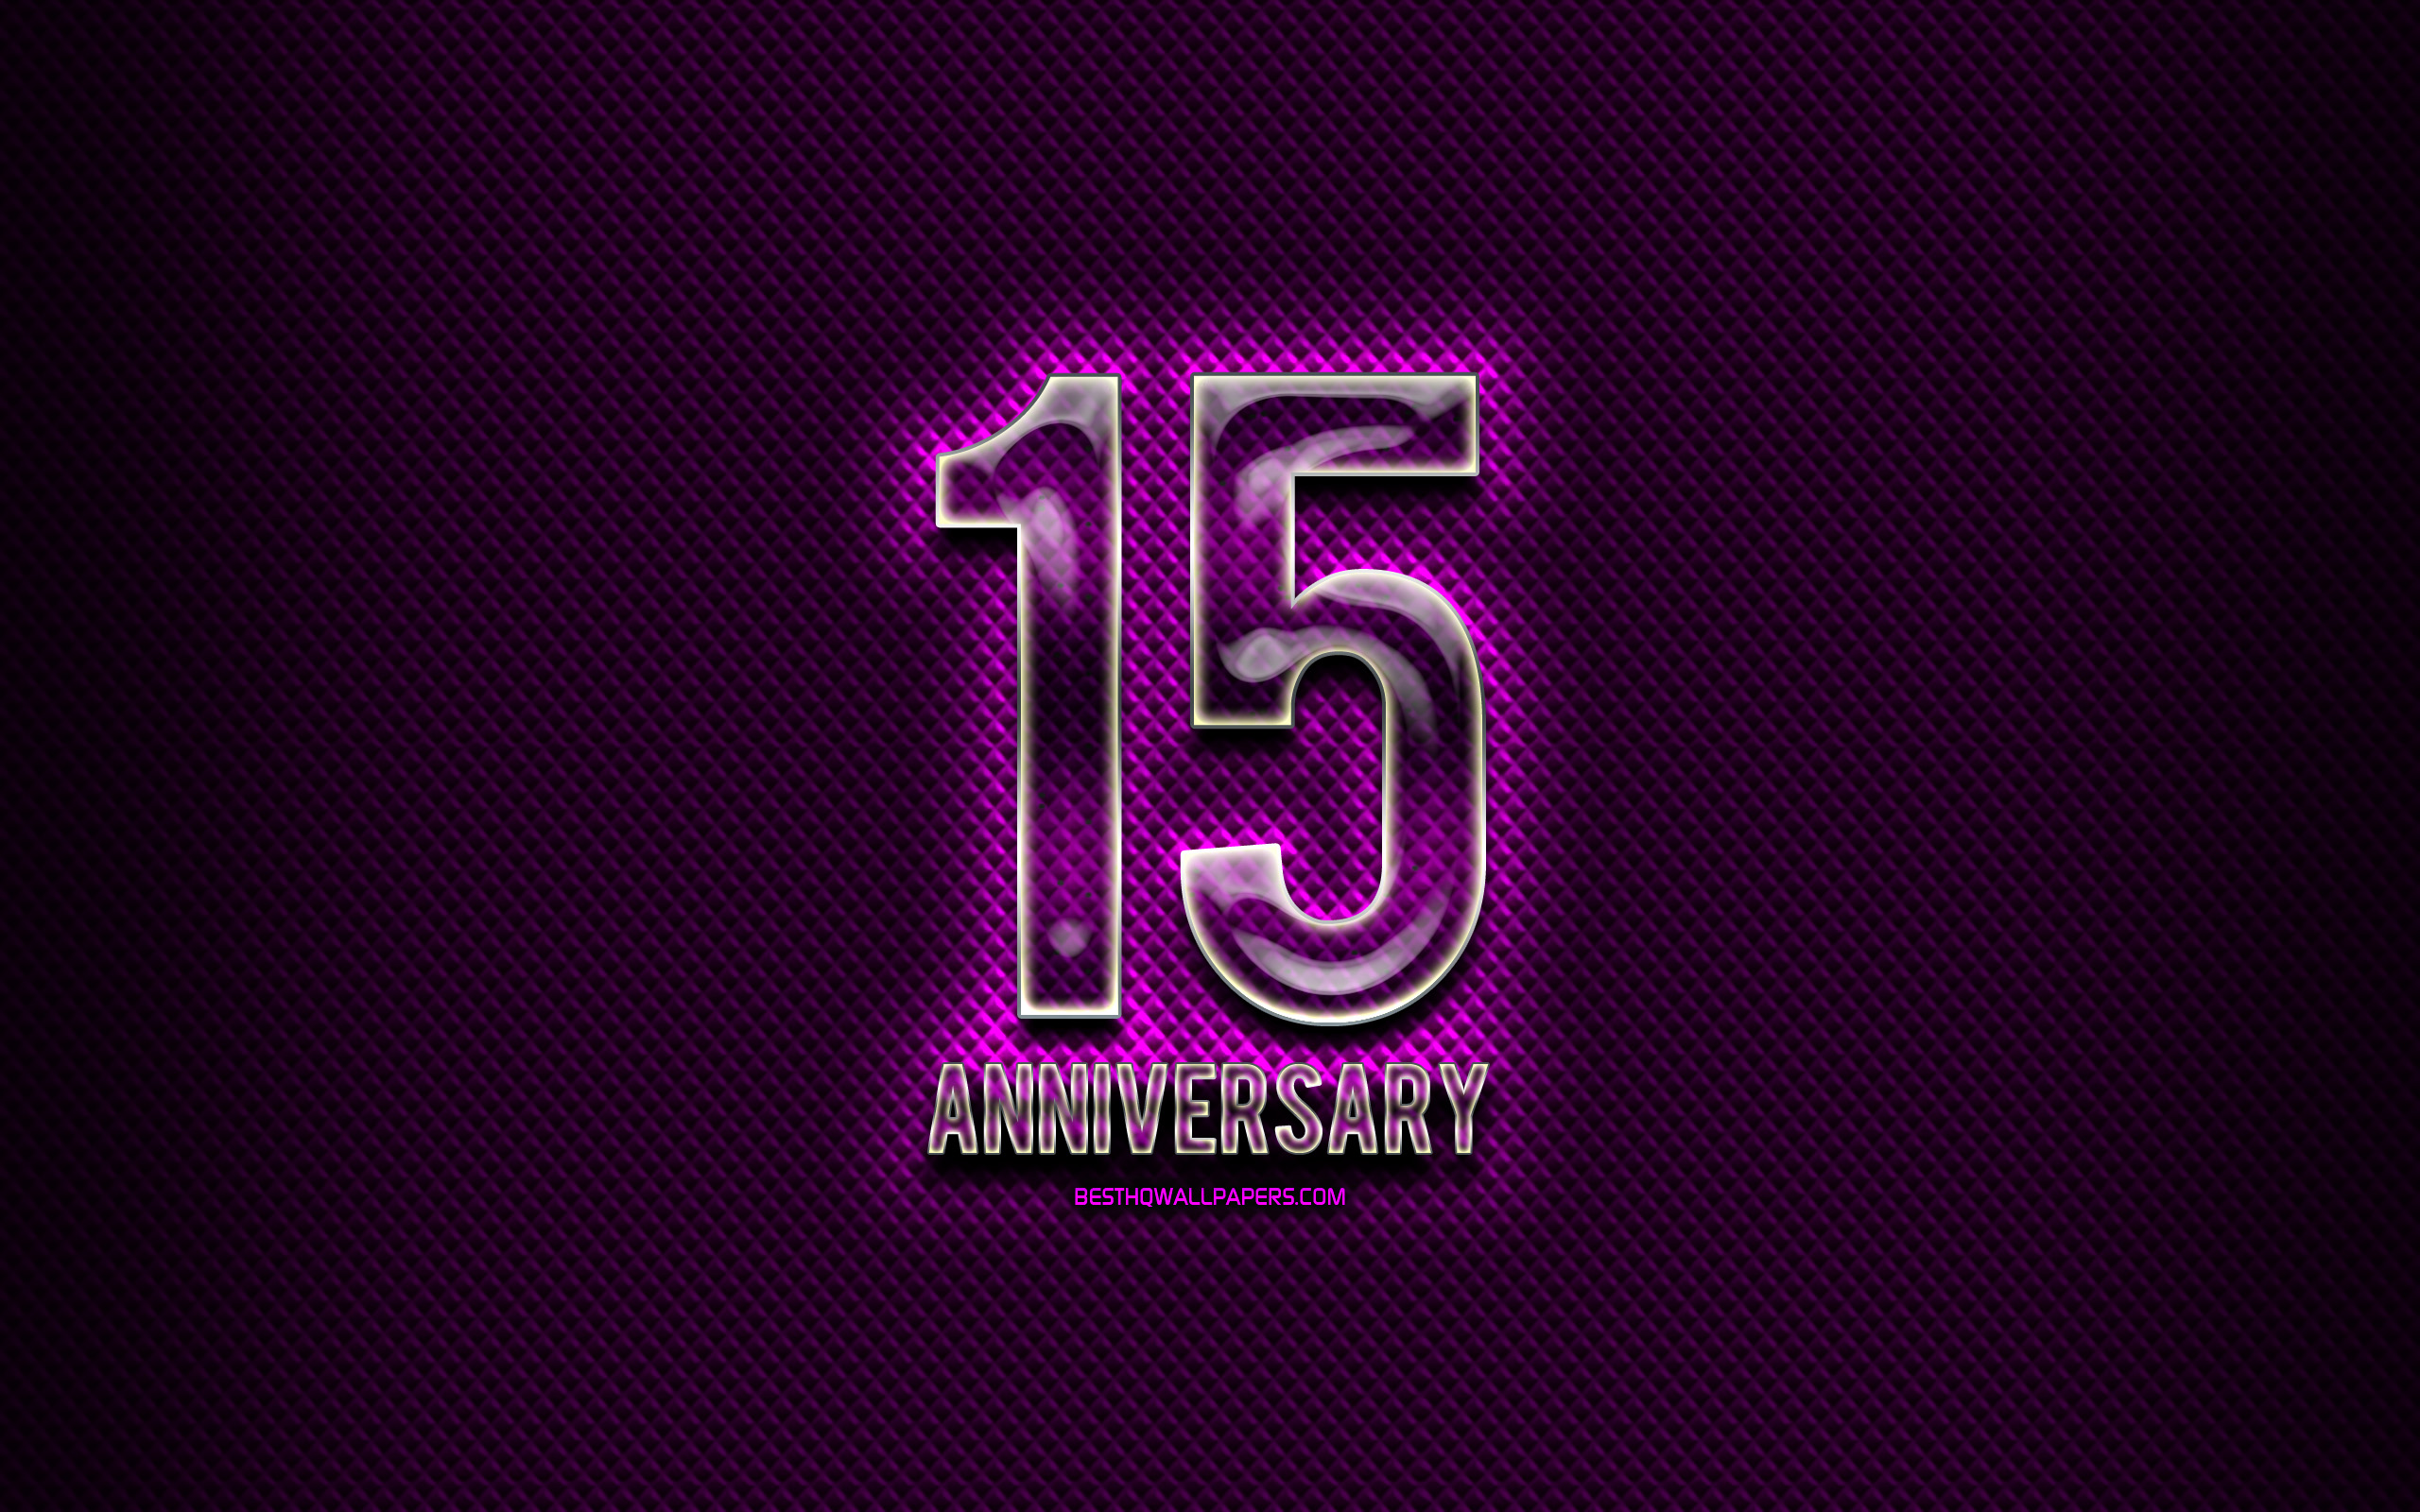 Download wallpaper 15th anniversary, glass signs, violet grunge background, 15 Years Anniversary, anniversary concepts, creative, Glass 15 anniversary sign for desktop with resolution 2560x1600. High Quality HD picture wallpaper